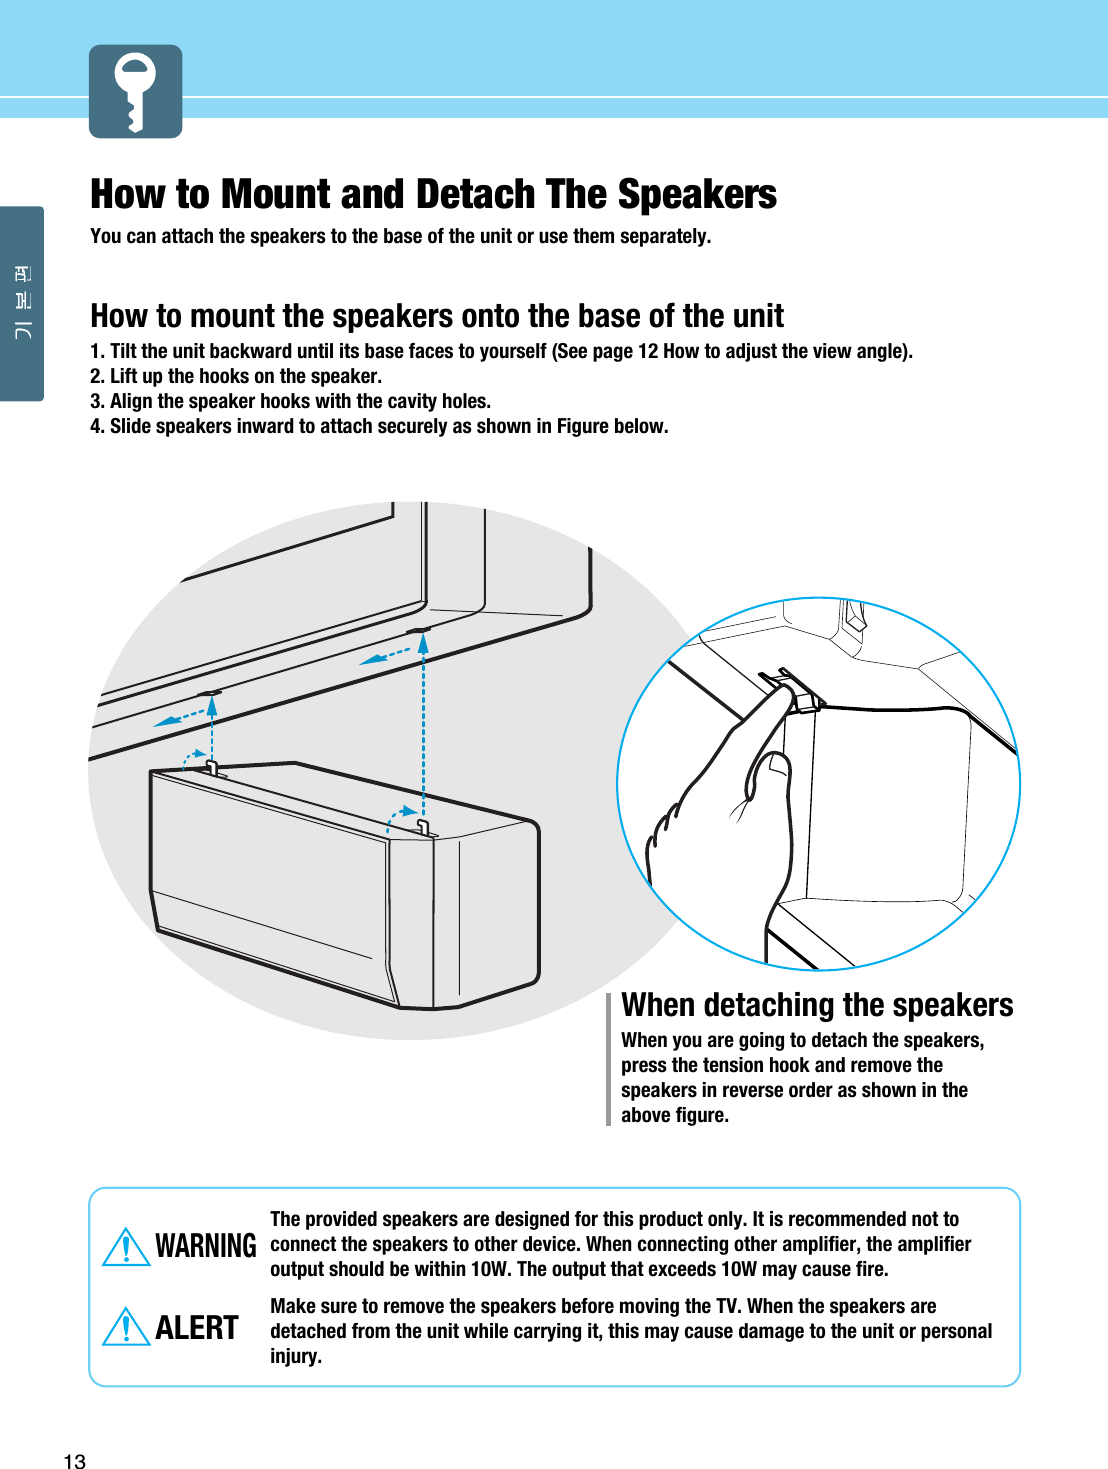 How to Mount and Detach The Speakers You can attach the speakers to the base of the unit or use them separately. How to mount the speakers onto the base of the unit1. Tilt the unit backward until its base faces to yourself (See page 12 How to adjust the view angle). 2. Lift up the hooks on the speaker.3. Align the speaker hooks with the cavity holes.4. Slide speakers inward to attach securely as shown in Figure below. 13The provided speakers are designed for this product only. It is recommended not toconnect the speakers to other device. When connecting other amplifier, the amplifieroutput should be within 10W. The output that exceeds 10W may cause fire. Make sure to remove the speakers before moving the TV. When the speakers aredetached from the unit while carrying it, this may cause damage to the unit or personalinjury.WARNINGALERTWhen detaching the speakersWhen you are going to detach the speakers,press the tension hook and remove thespeakers in reverse order as shown in theabove figure. 